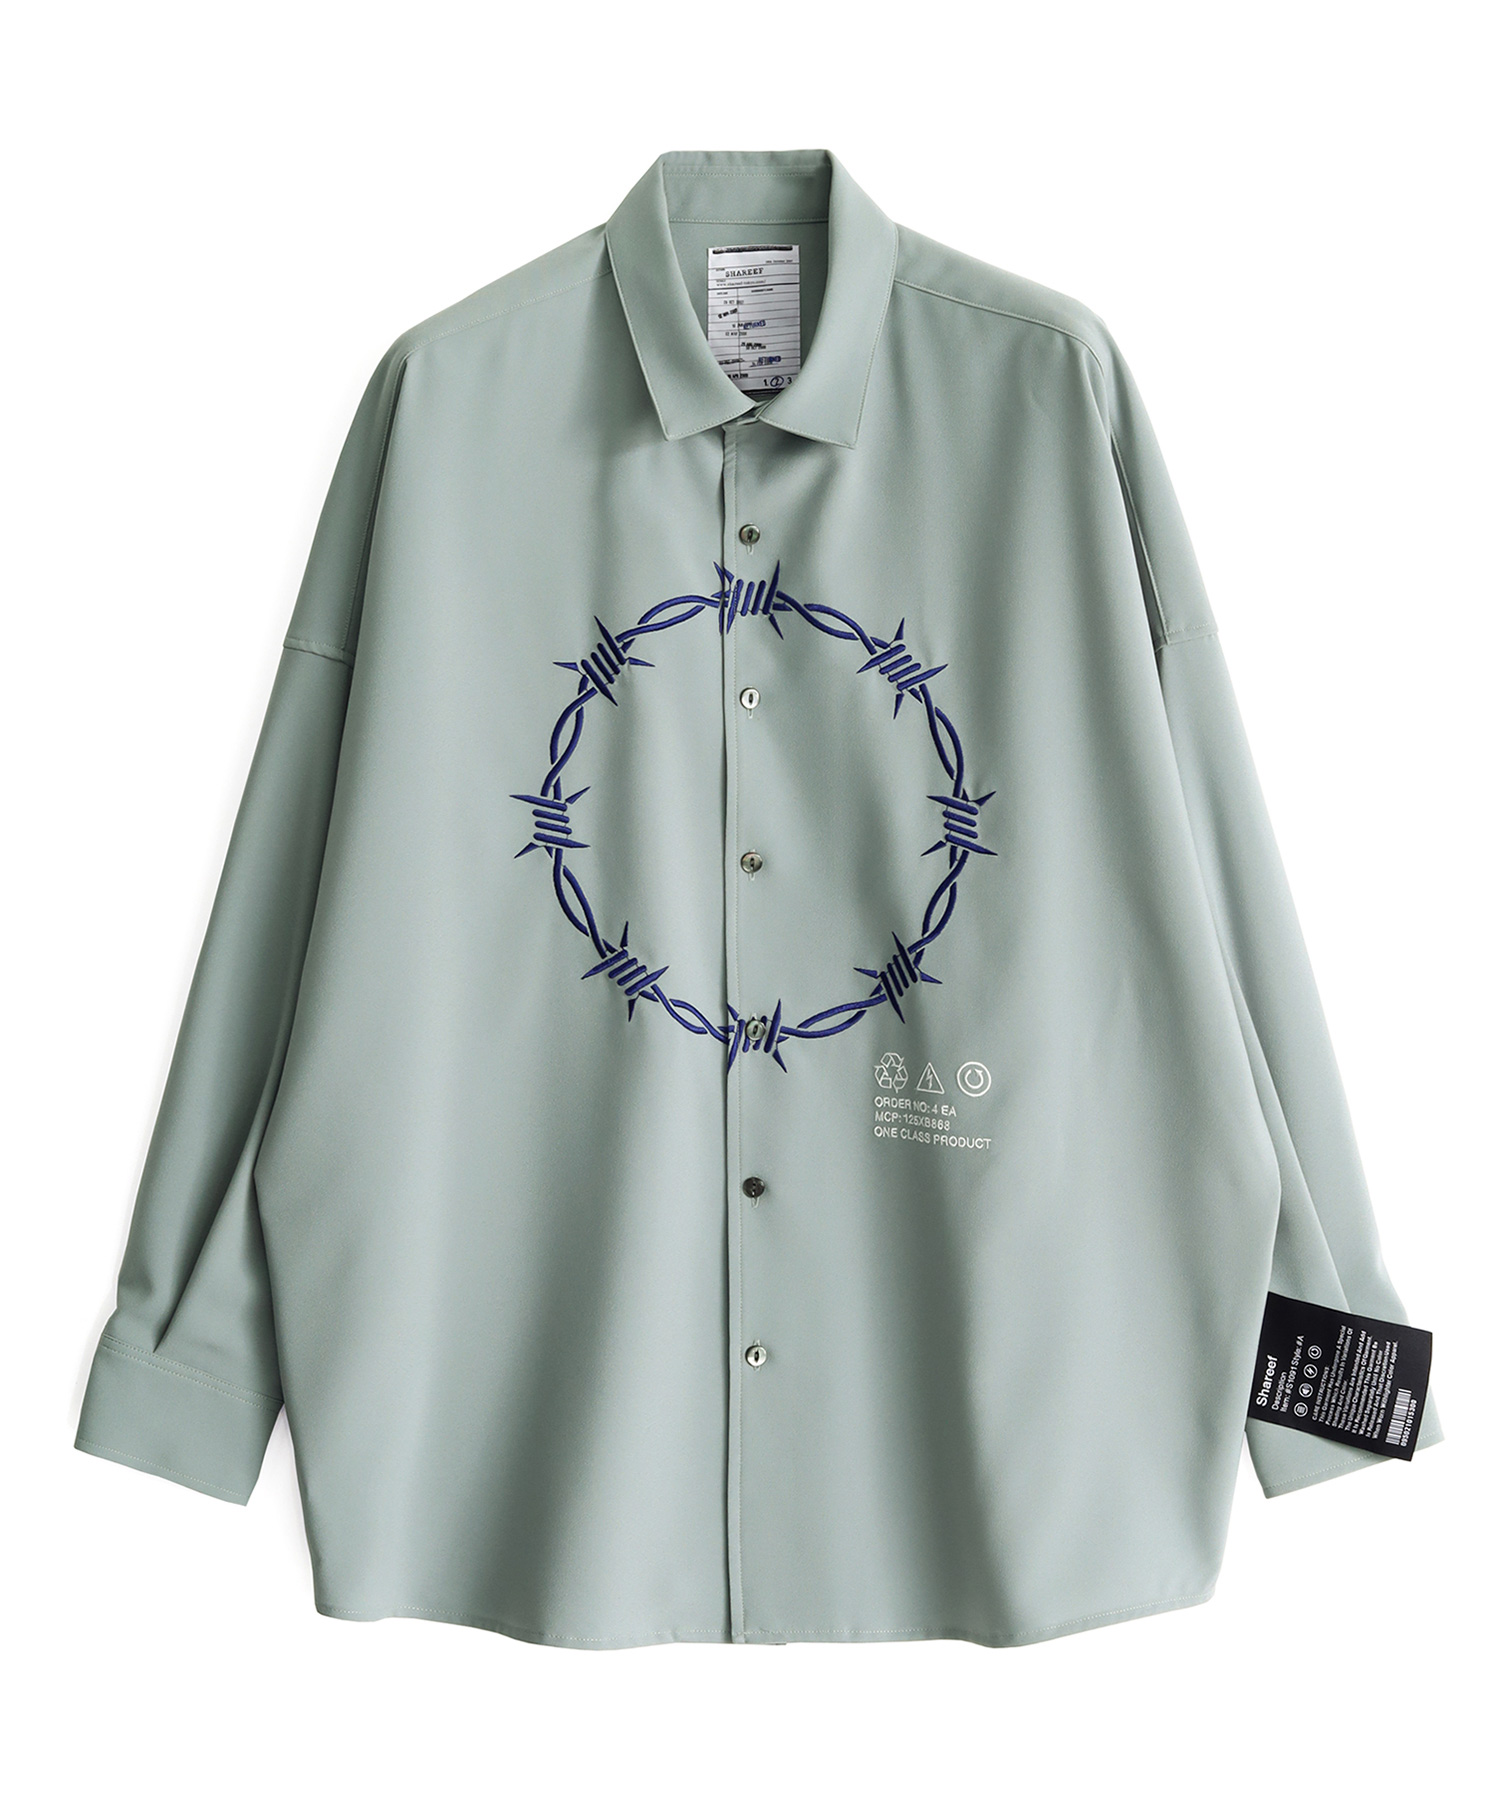 SHAREEF シャツ BARBED WIRE emb. L/S SHIRTS着丈78